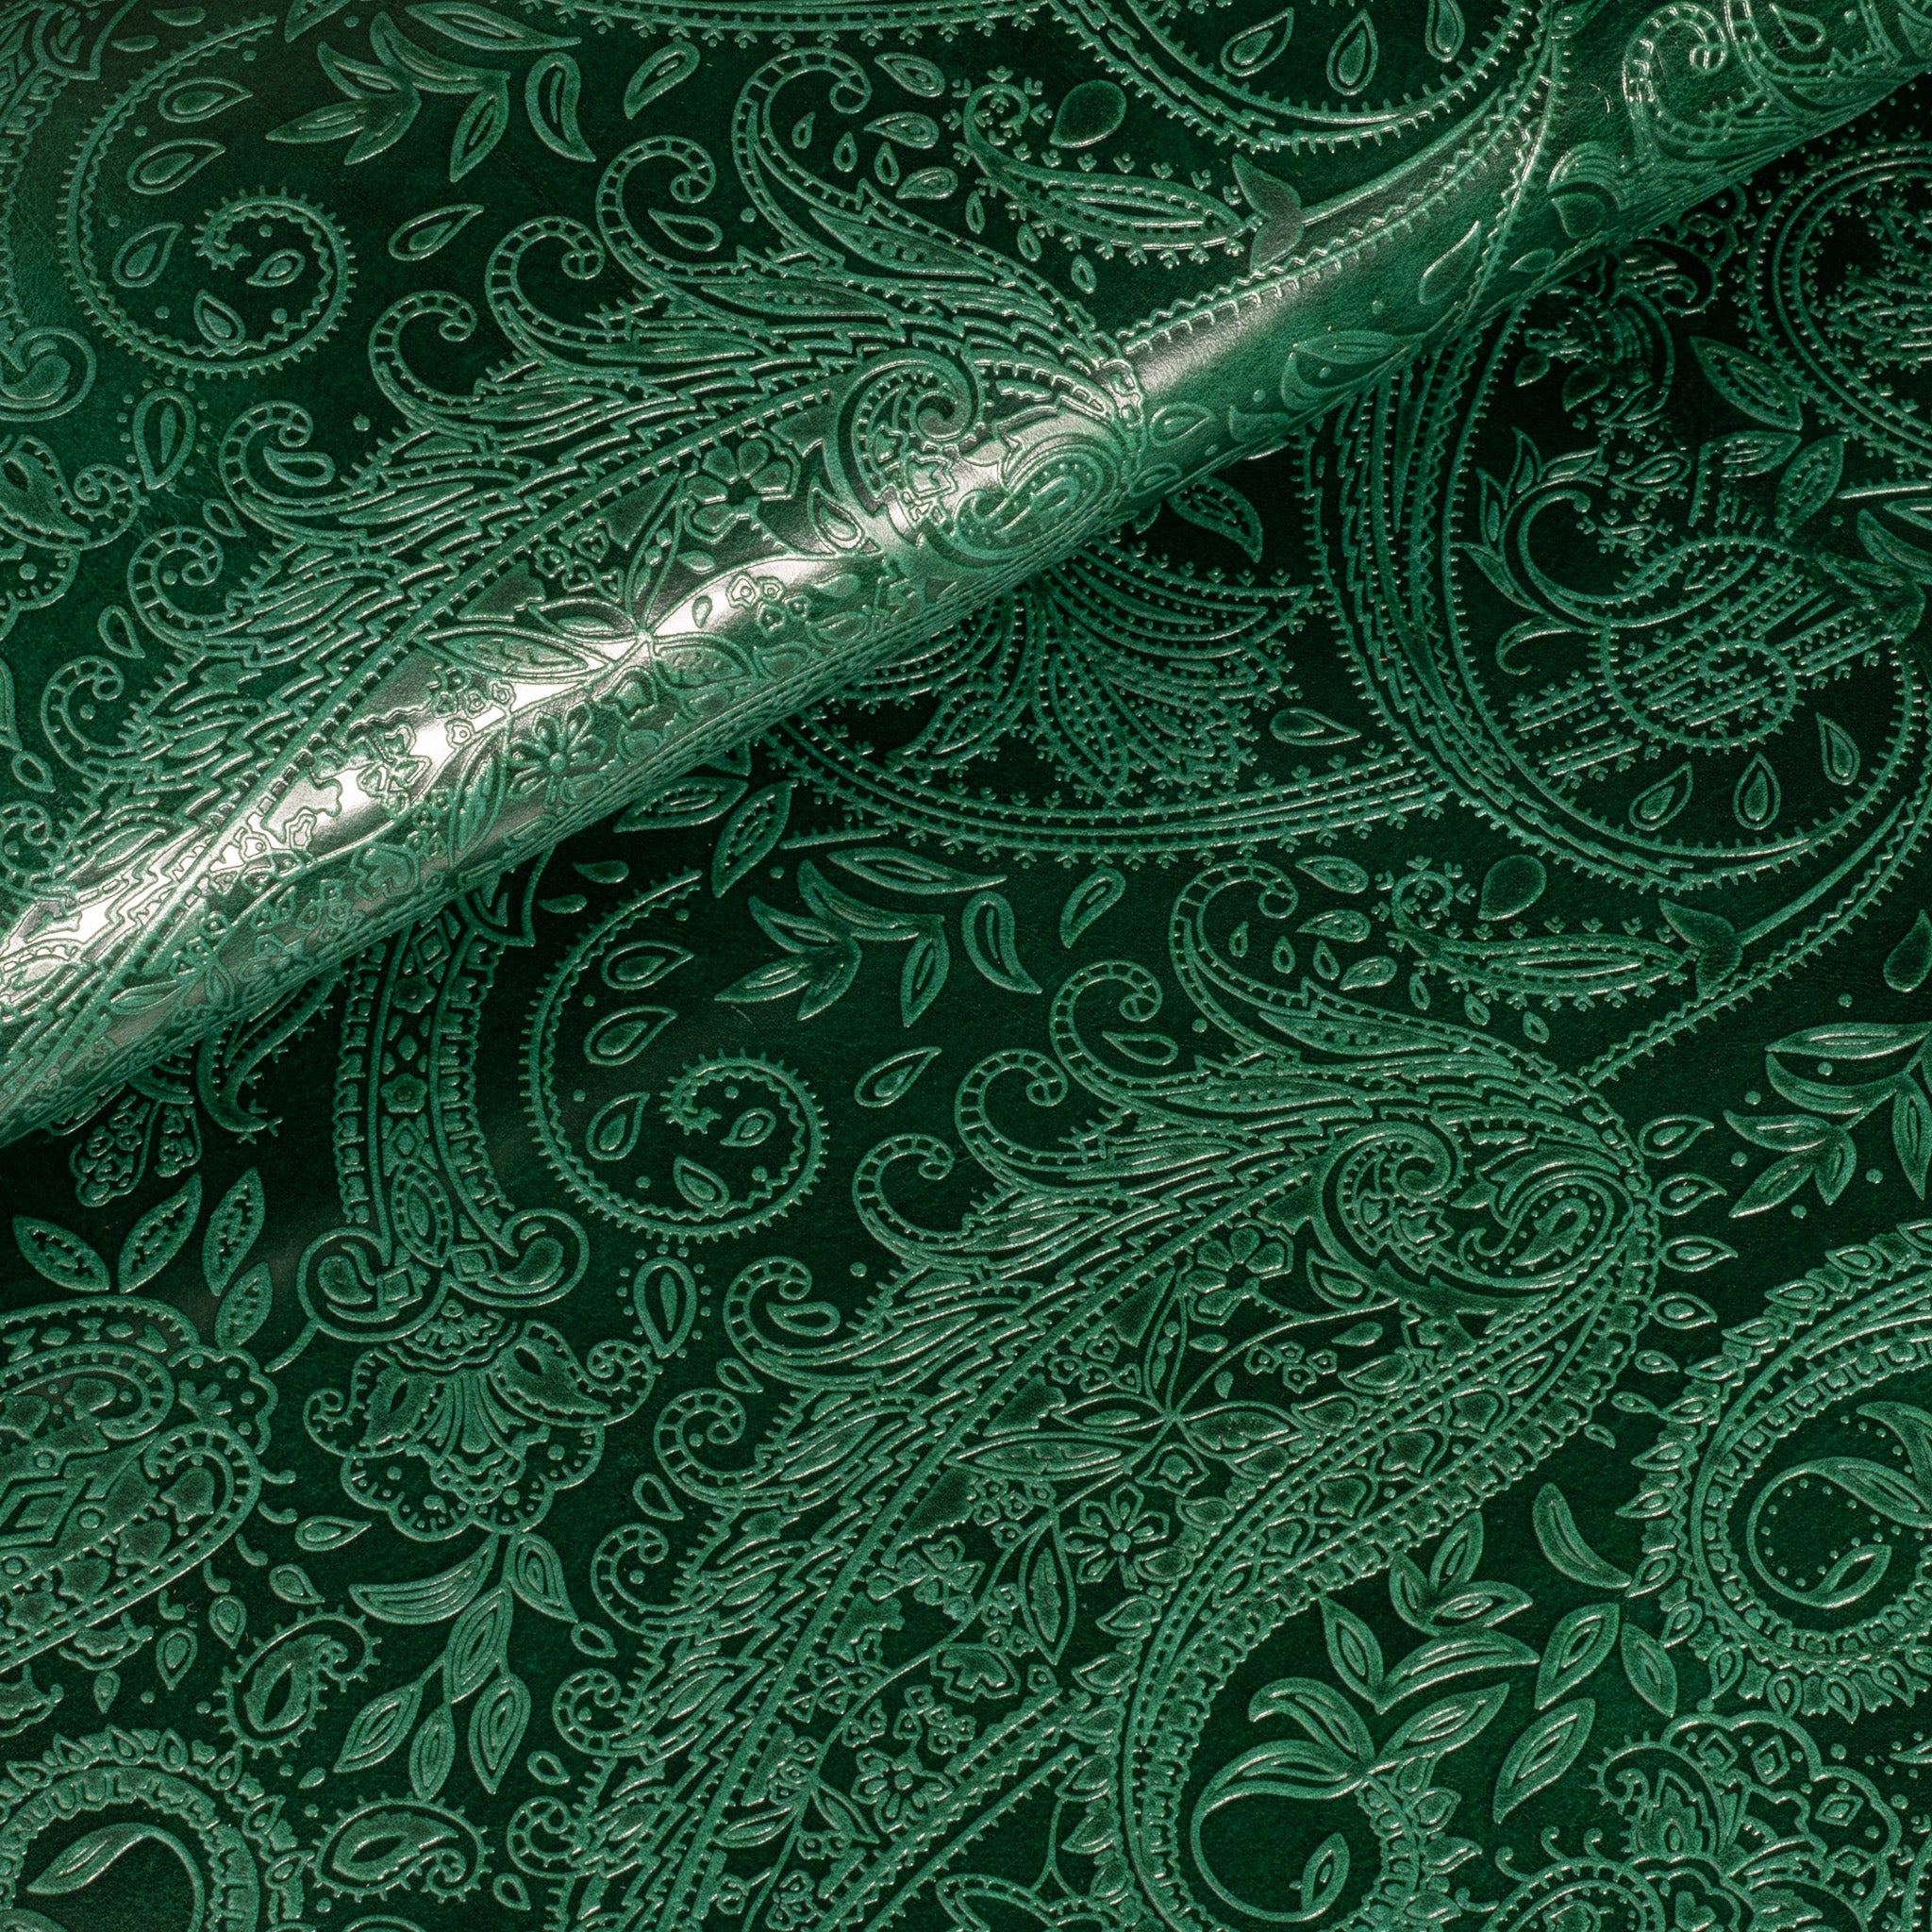 GAUCHO OIL CASHMERE EMBOSSED - EMERALD GREEN